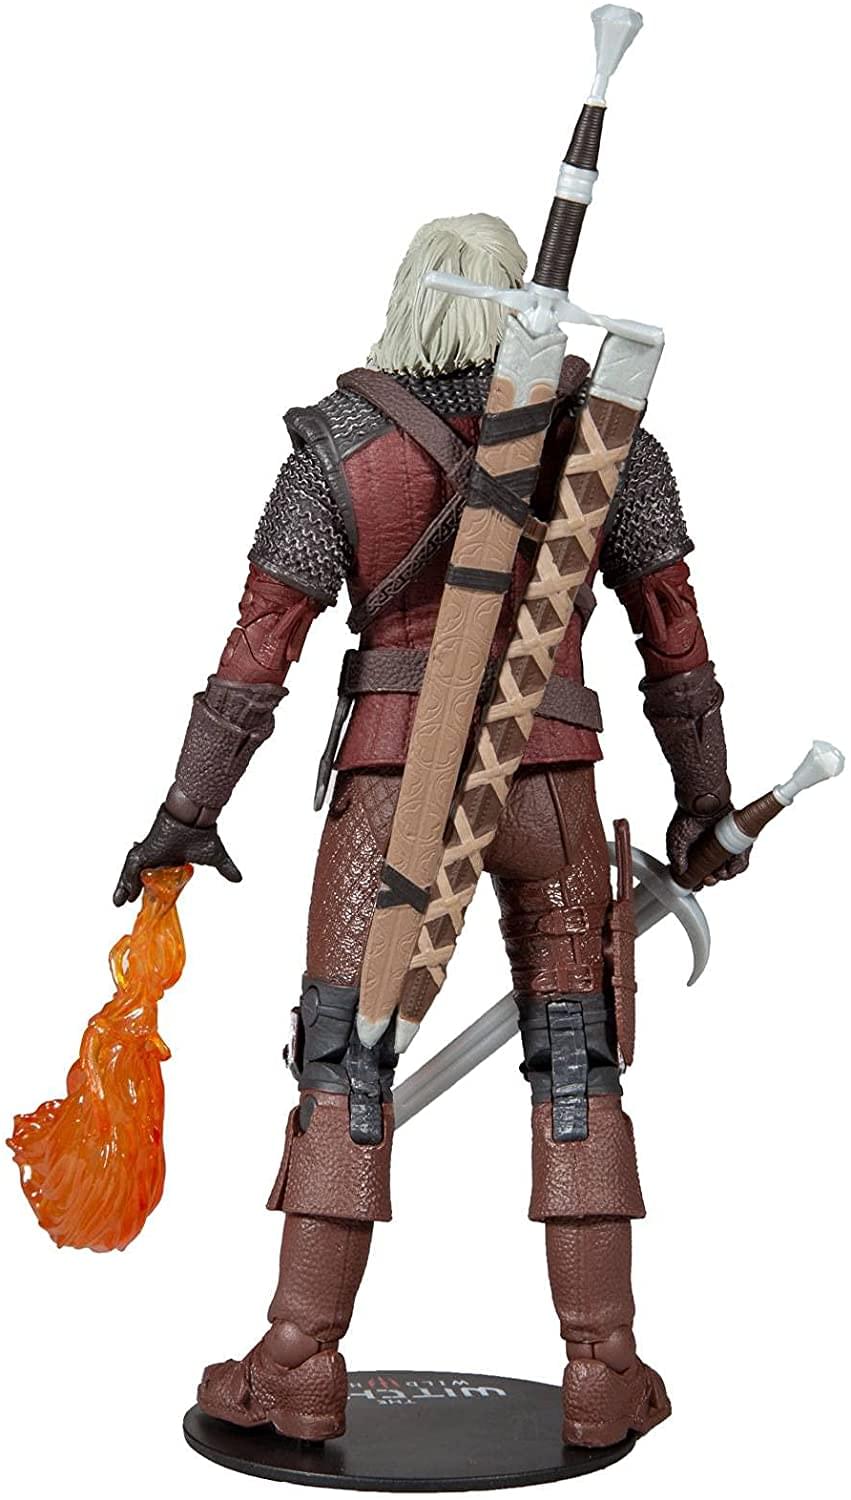 The Witcher 7 Inch Action Figure | Geralt of Rivia (Wolf Armor)